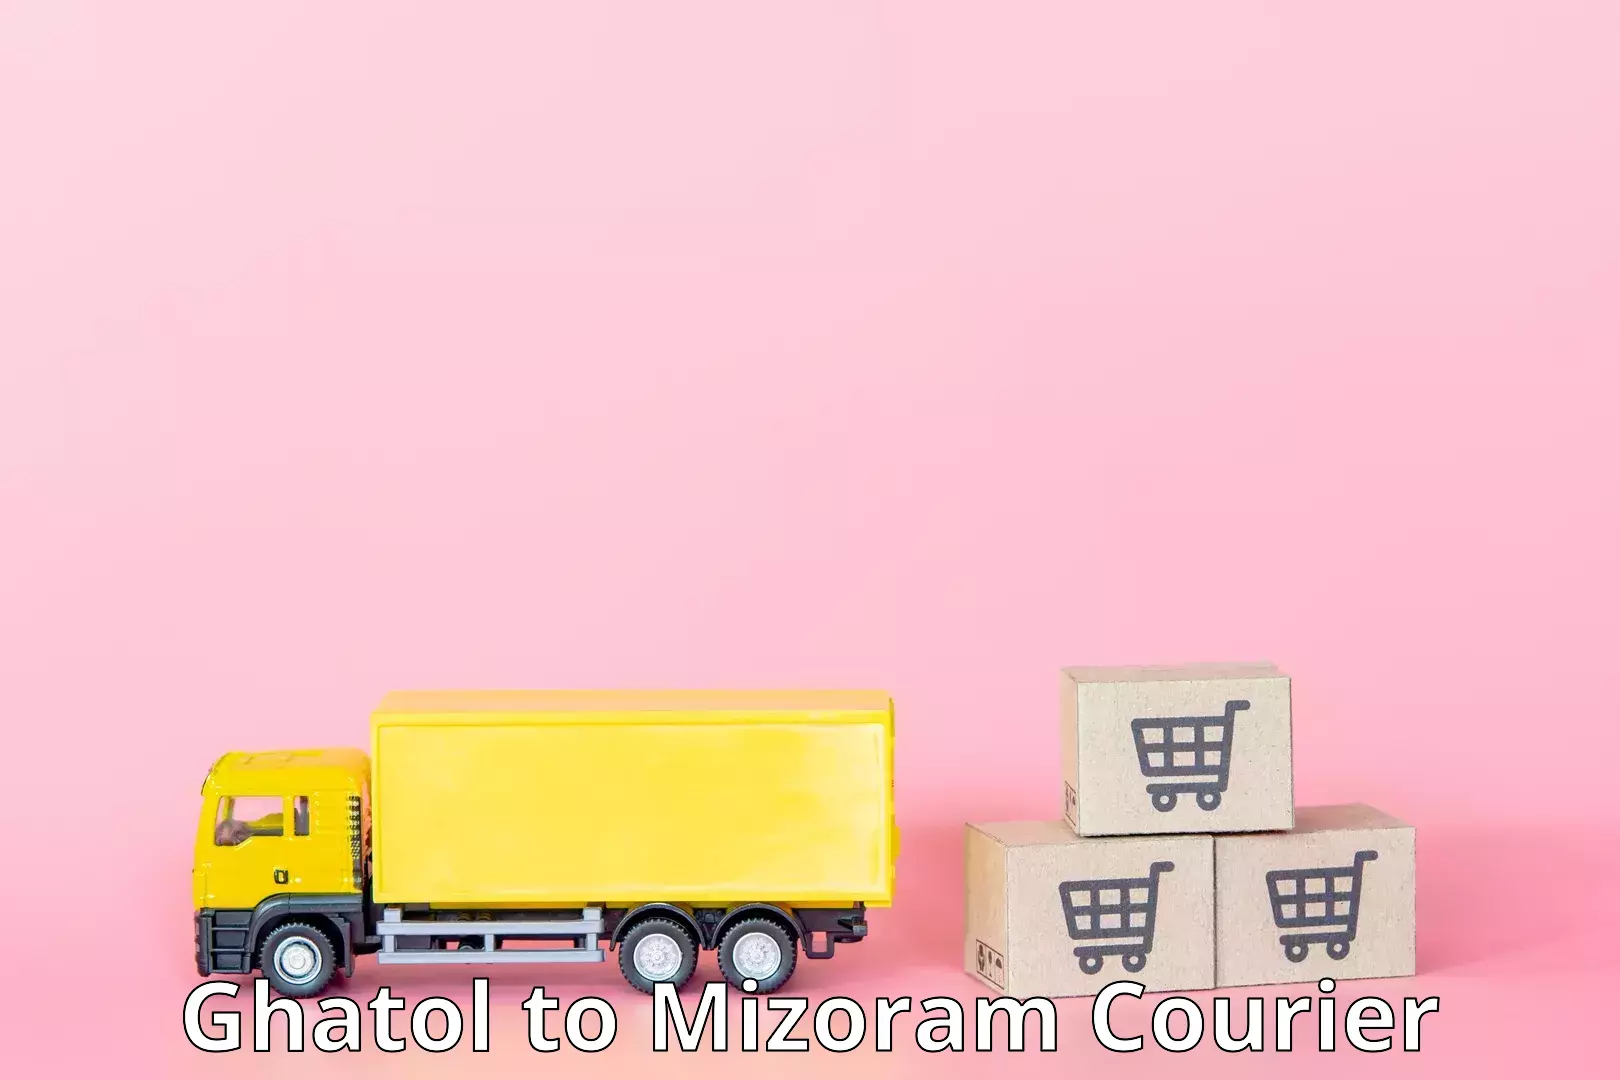 State-of-the-art courier technology Ghatol to Mizoram